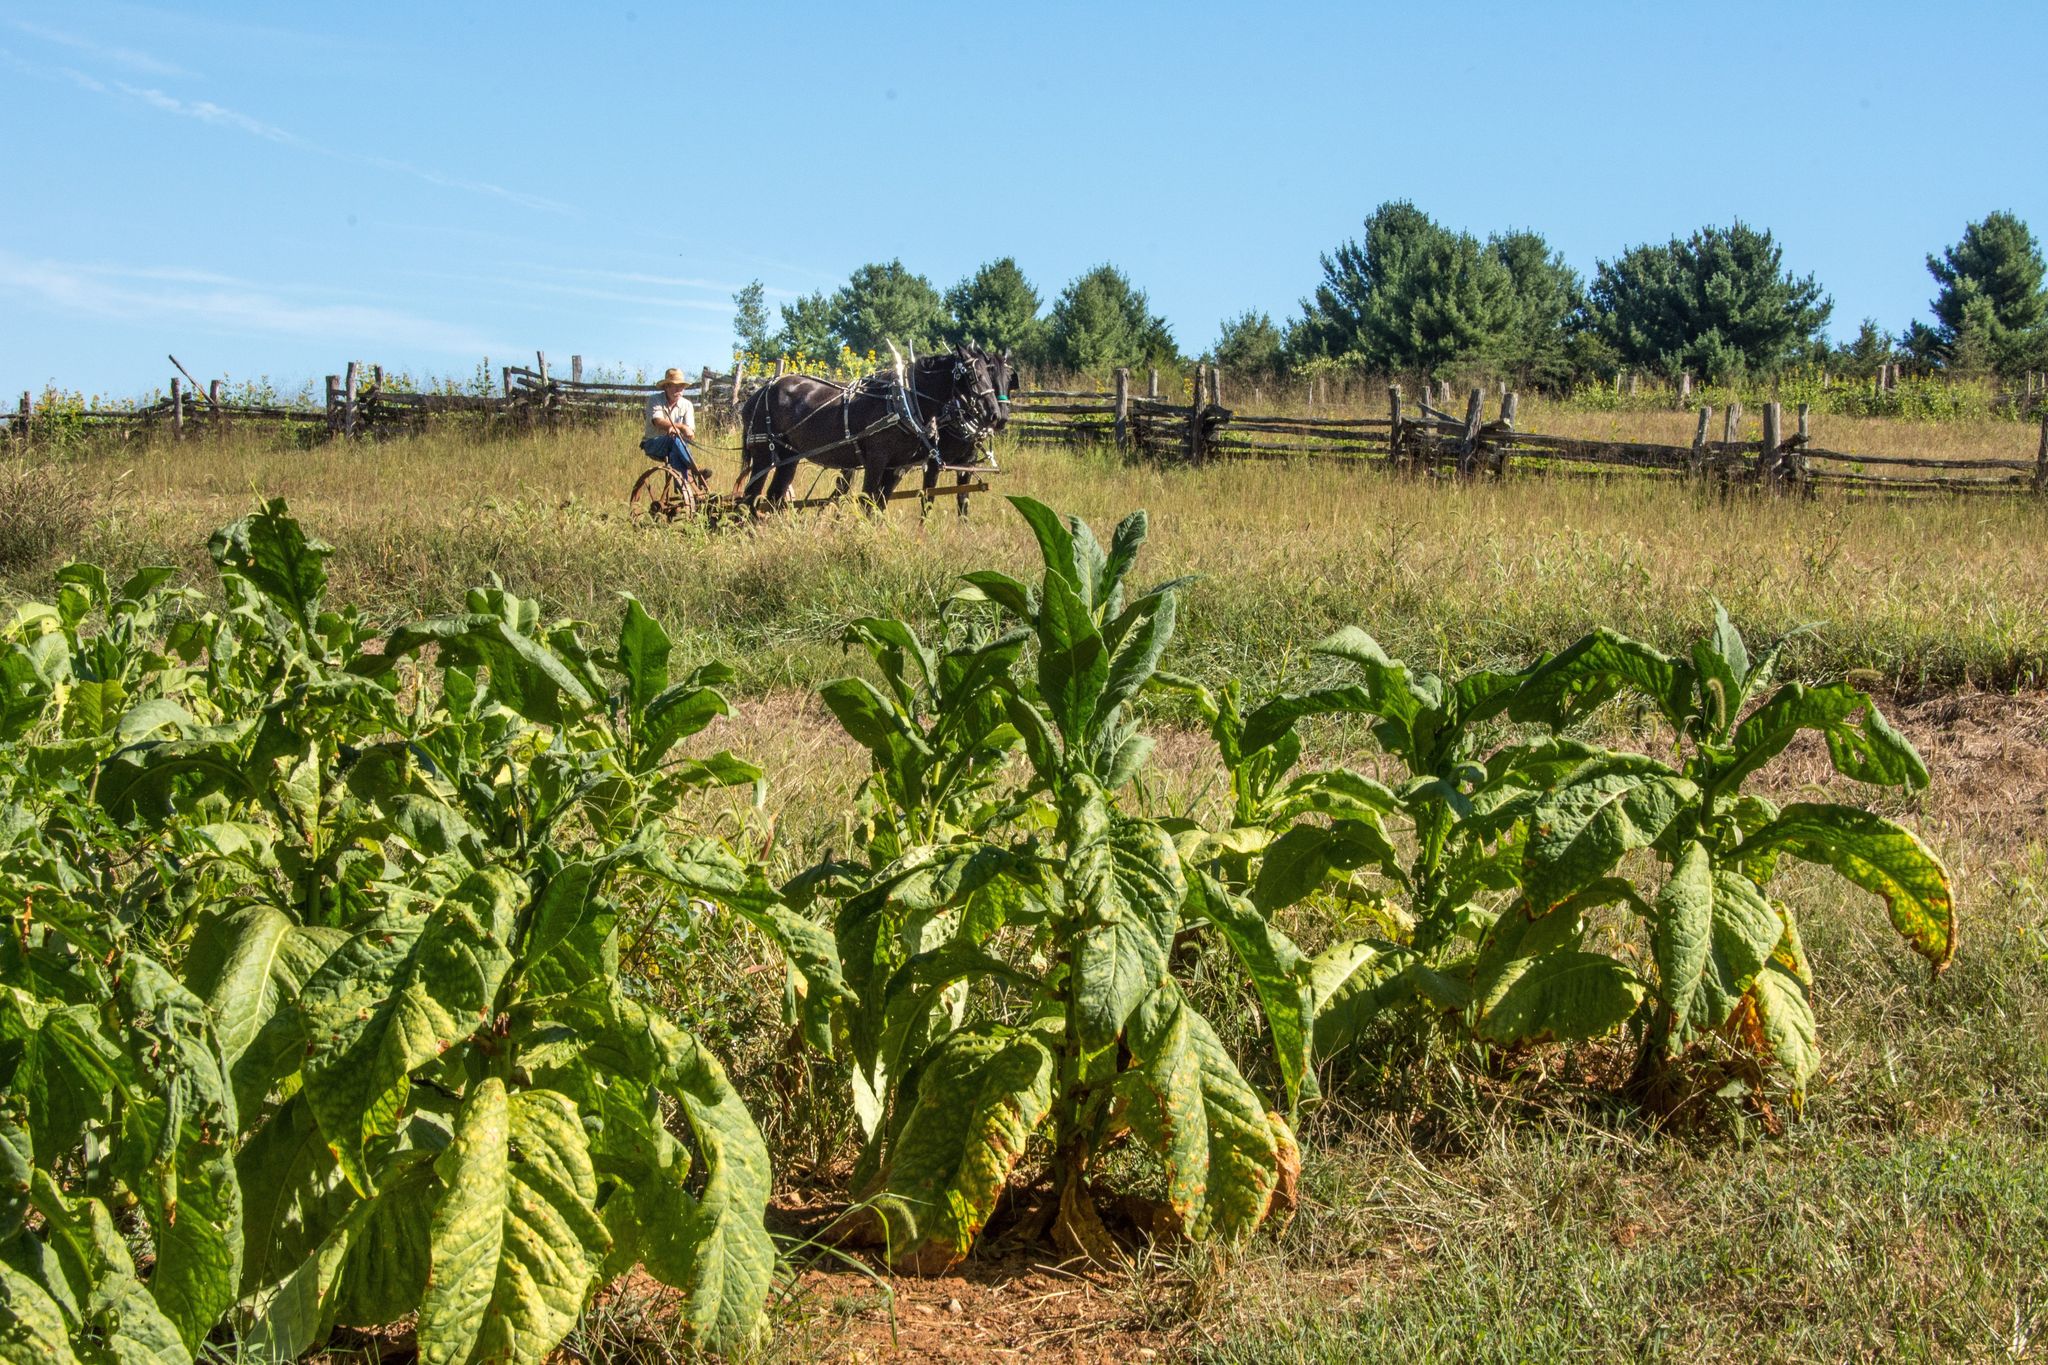 The main crop on the plantation where Booker T. Washington was born was tobacco. This photograph shows a man with draft horses preparing to plow a field.